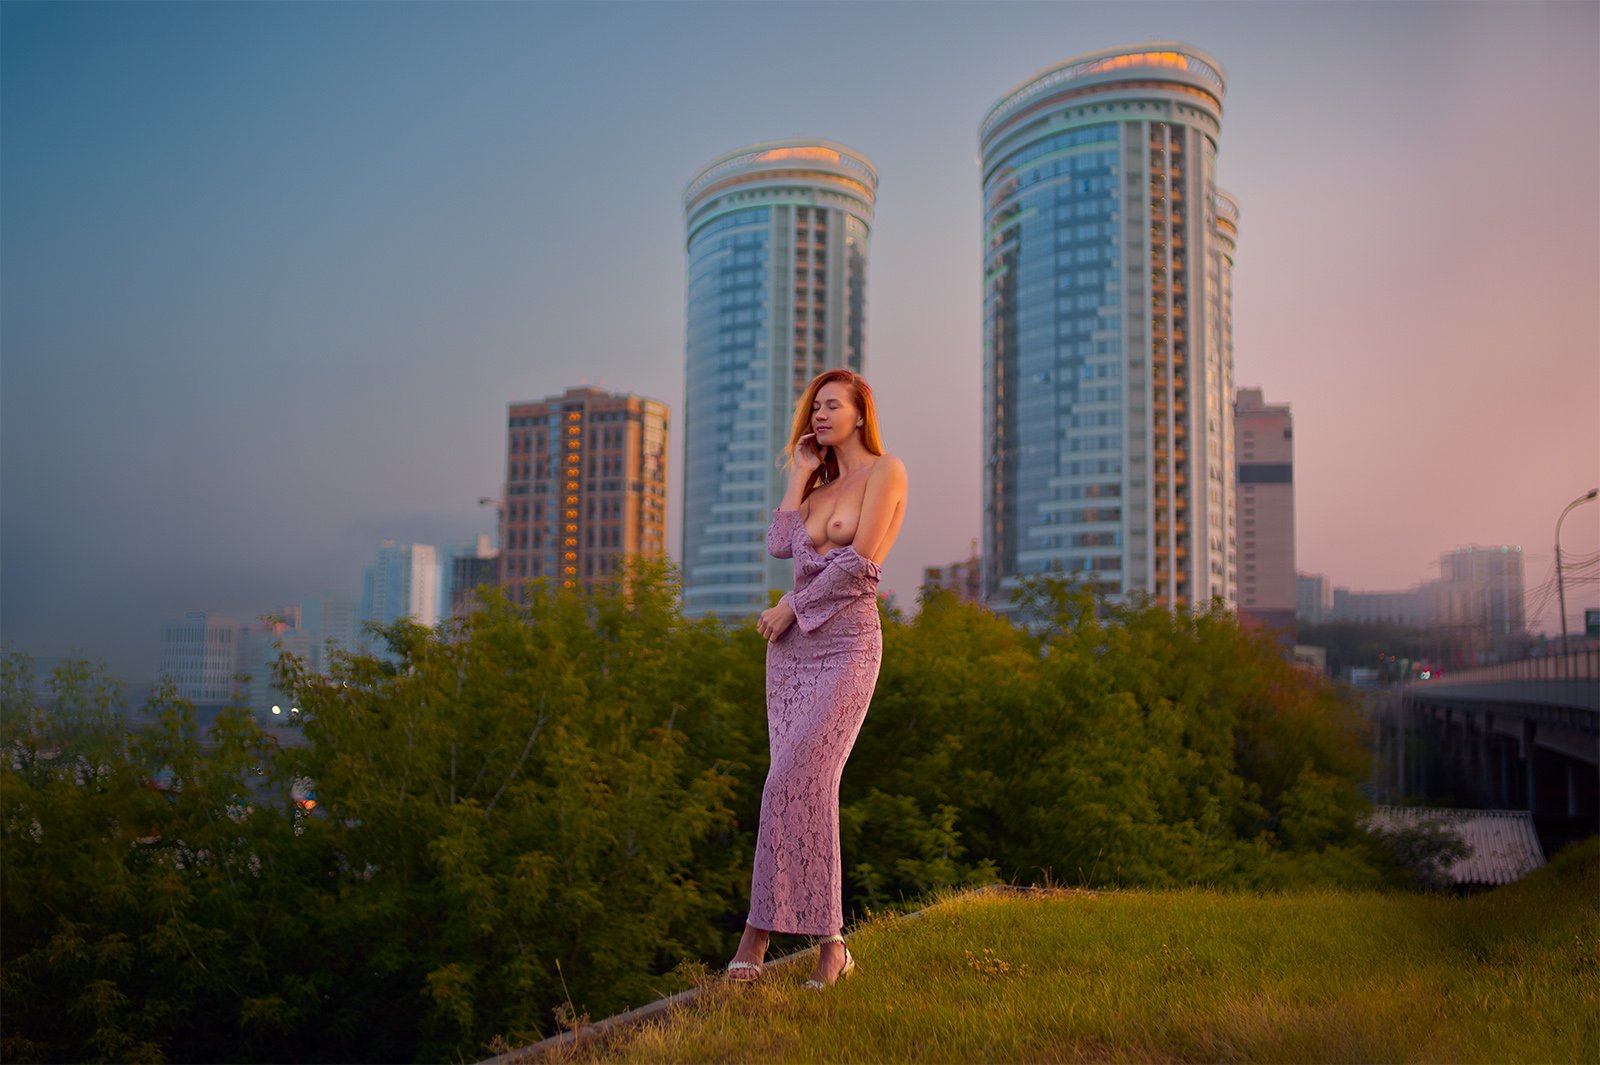 Outdoors  People  City  Full Length  Sky  Grass  Leisure Activity  Day  Lifestyles  Tree  Side View  Architecture  One Person  Healthy Lifestyle  Park  morning  sunlight  sunny  sunrise  sunshine  girl  young  young women  beautiful  beauty  beauty in nat, Andrew Gnezdilov